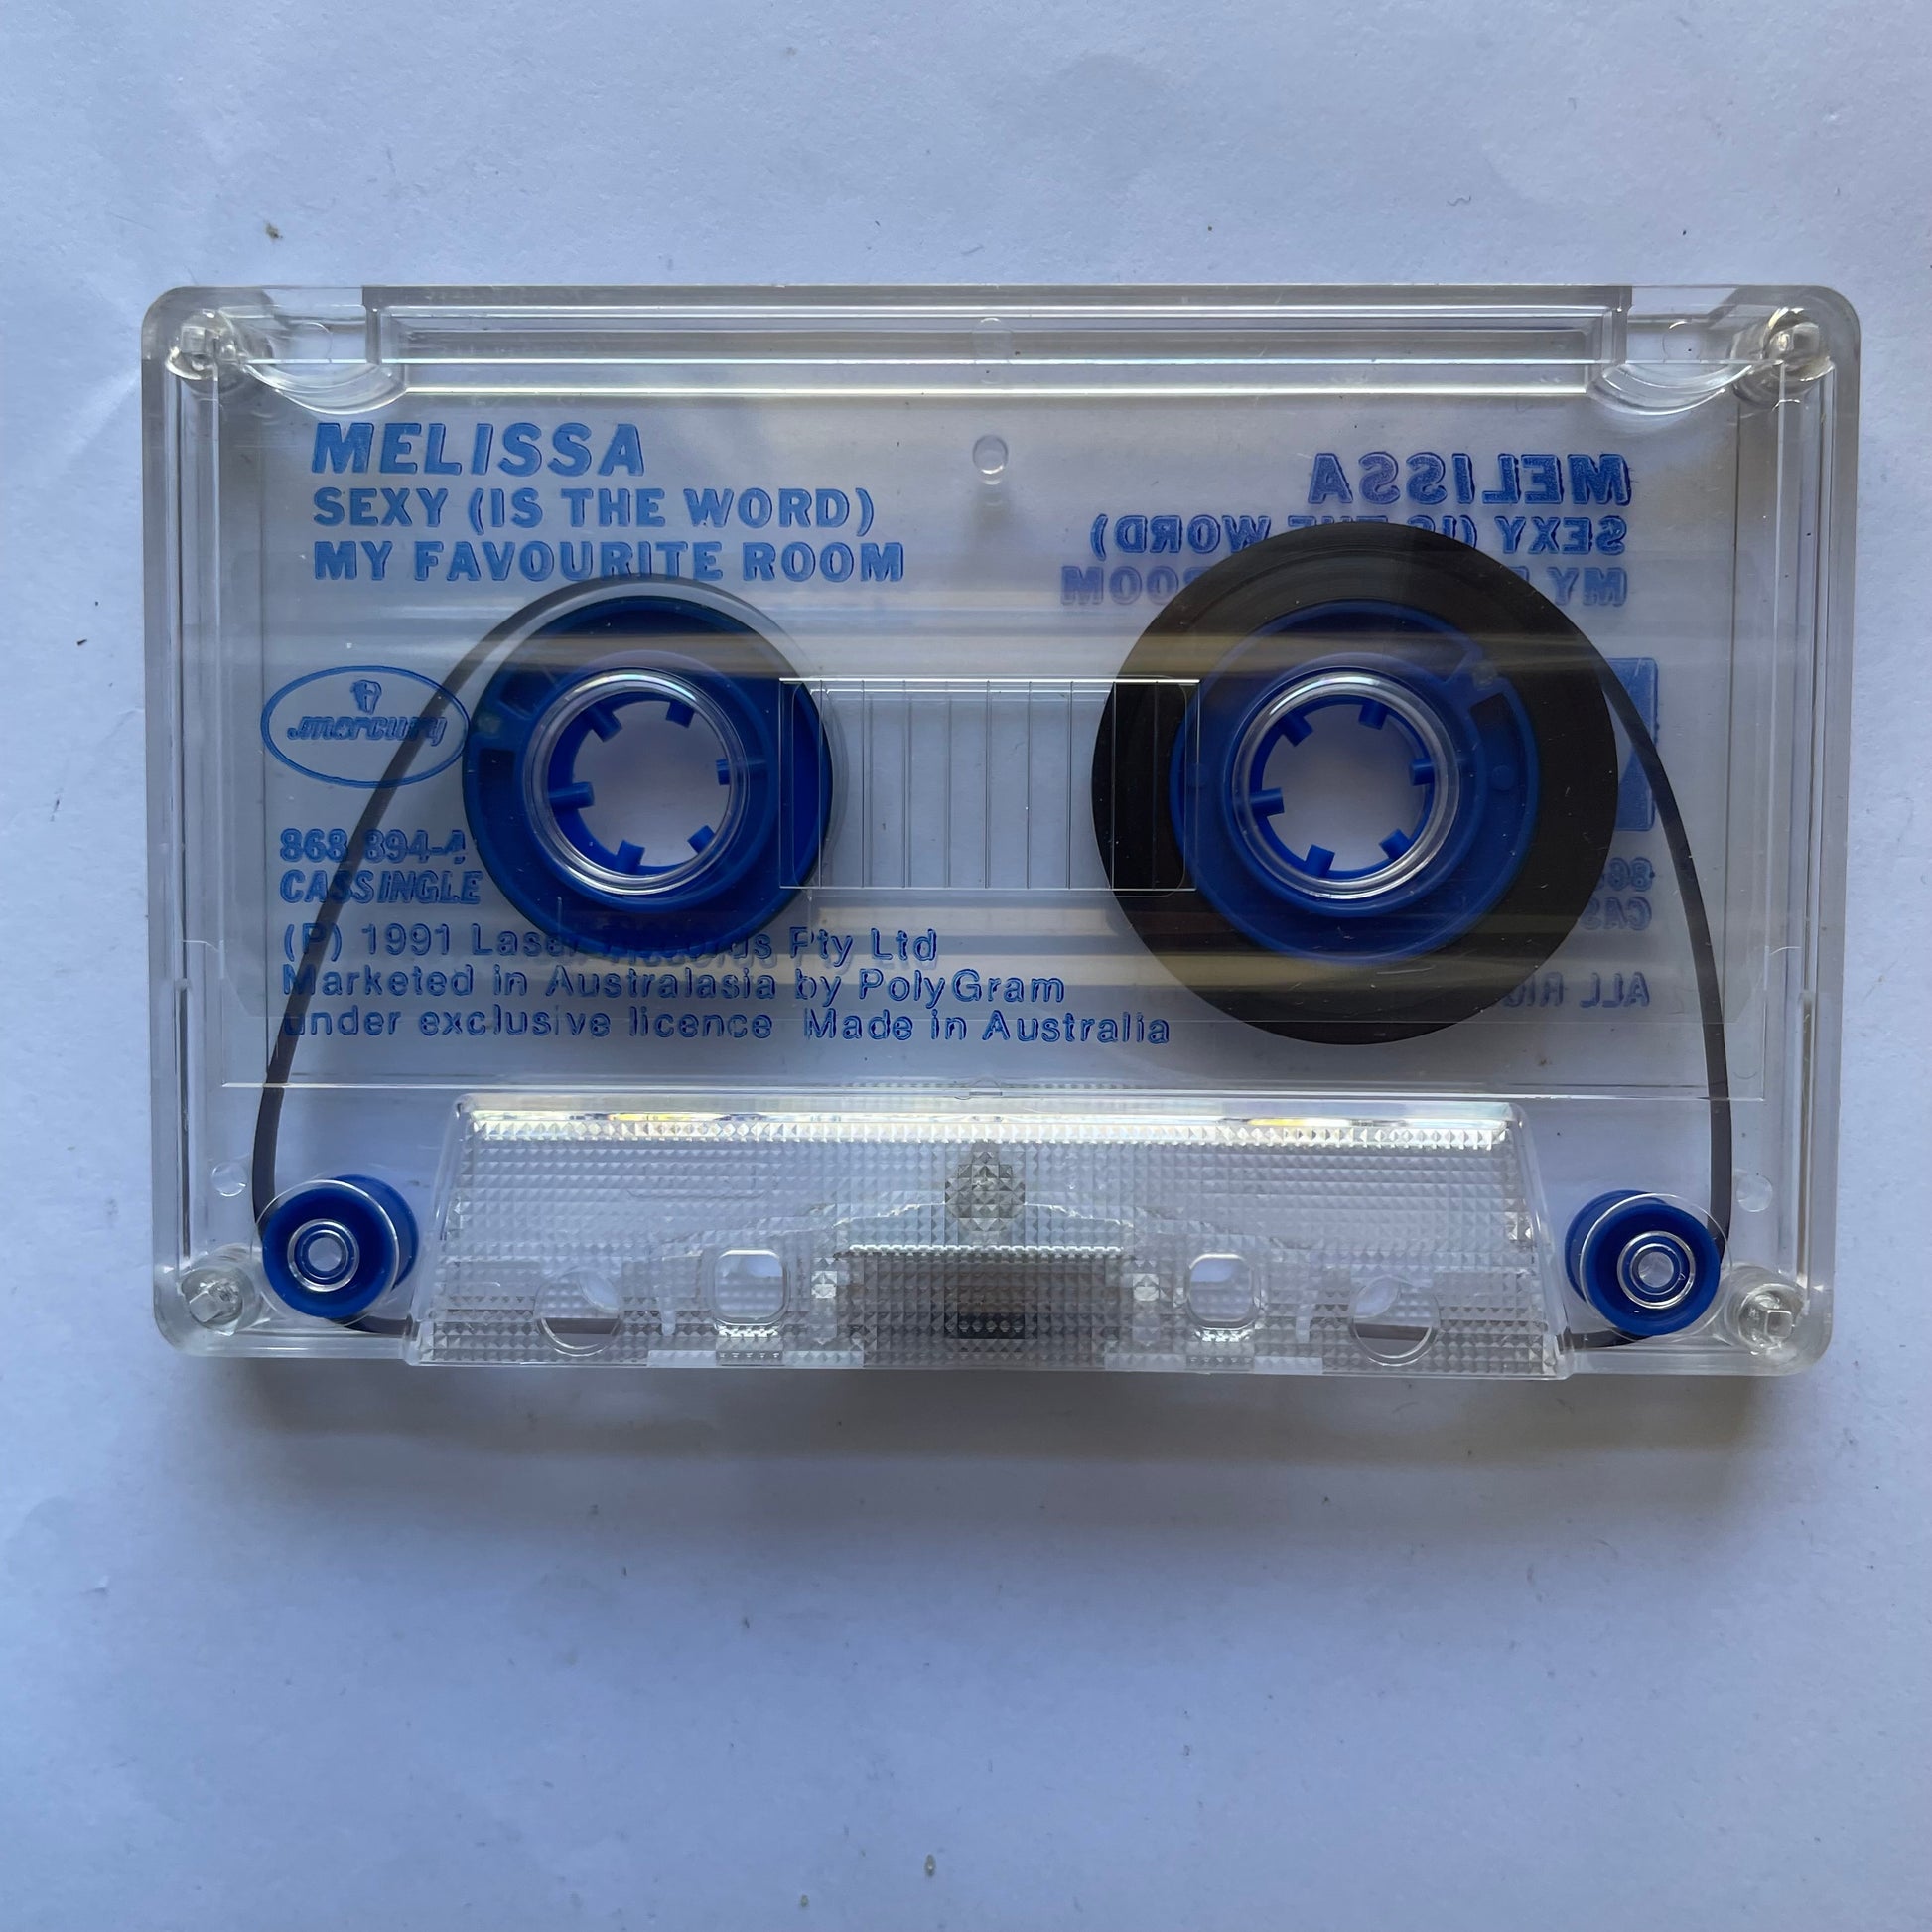 Tape Cassette Melissa sexy is the word 1991 side 1 